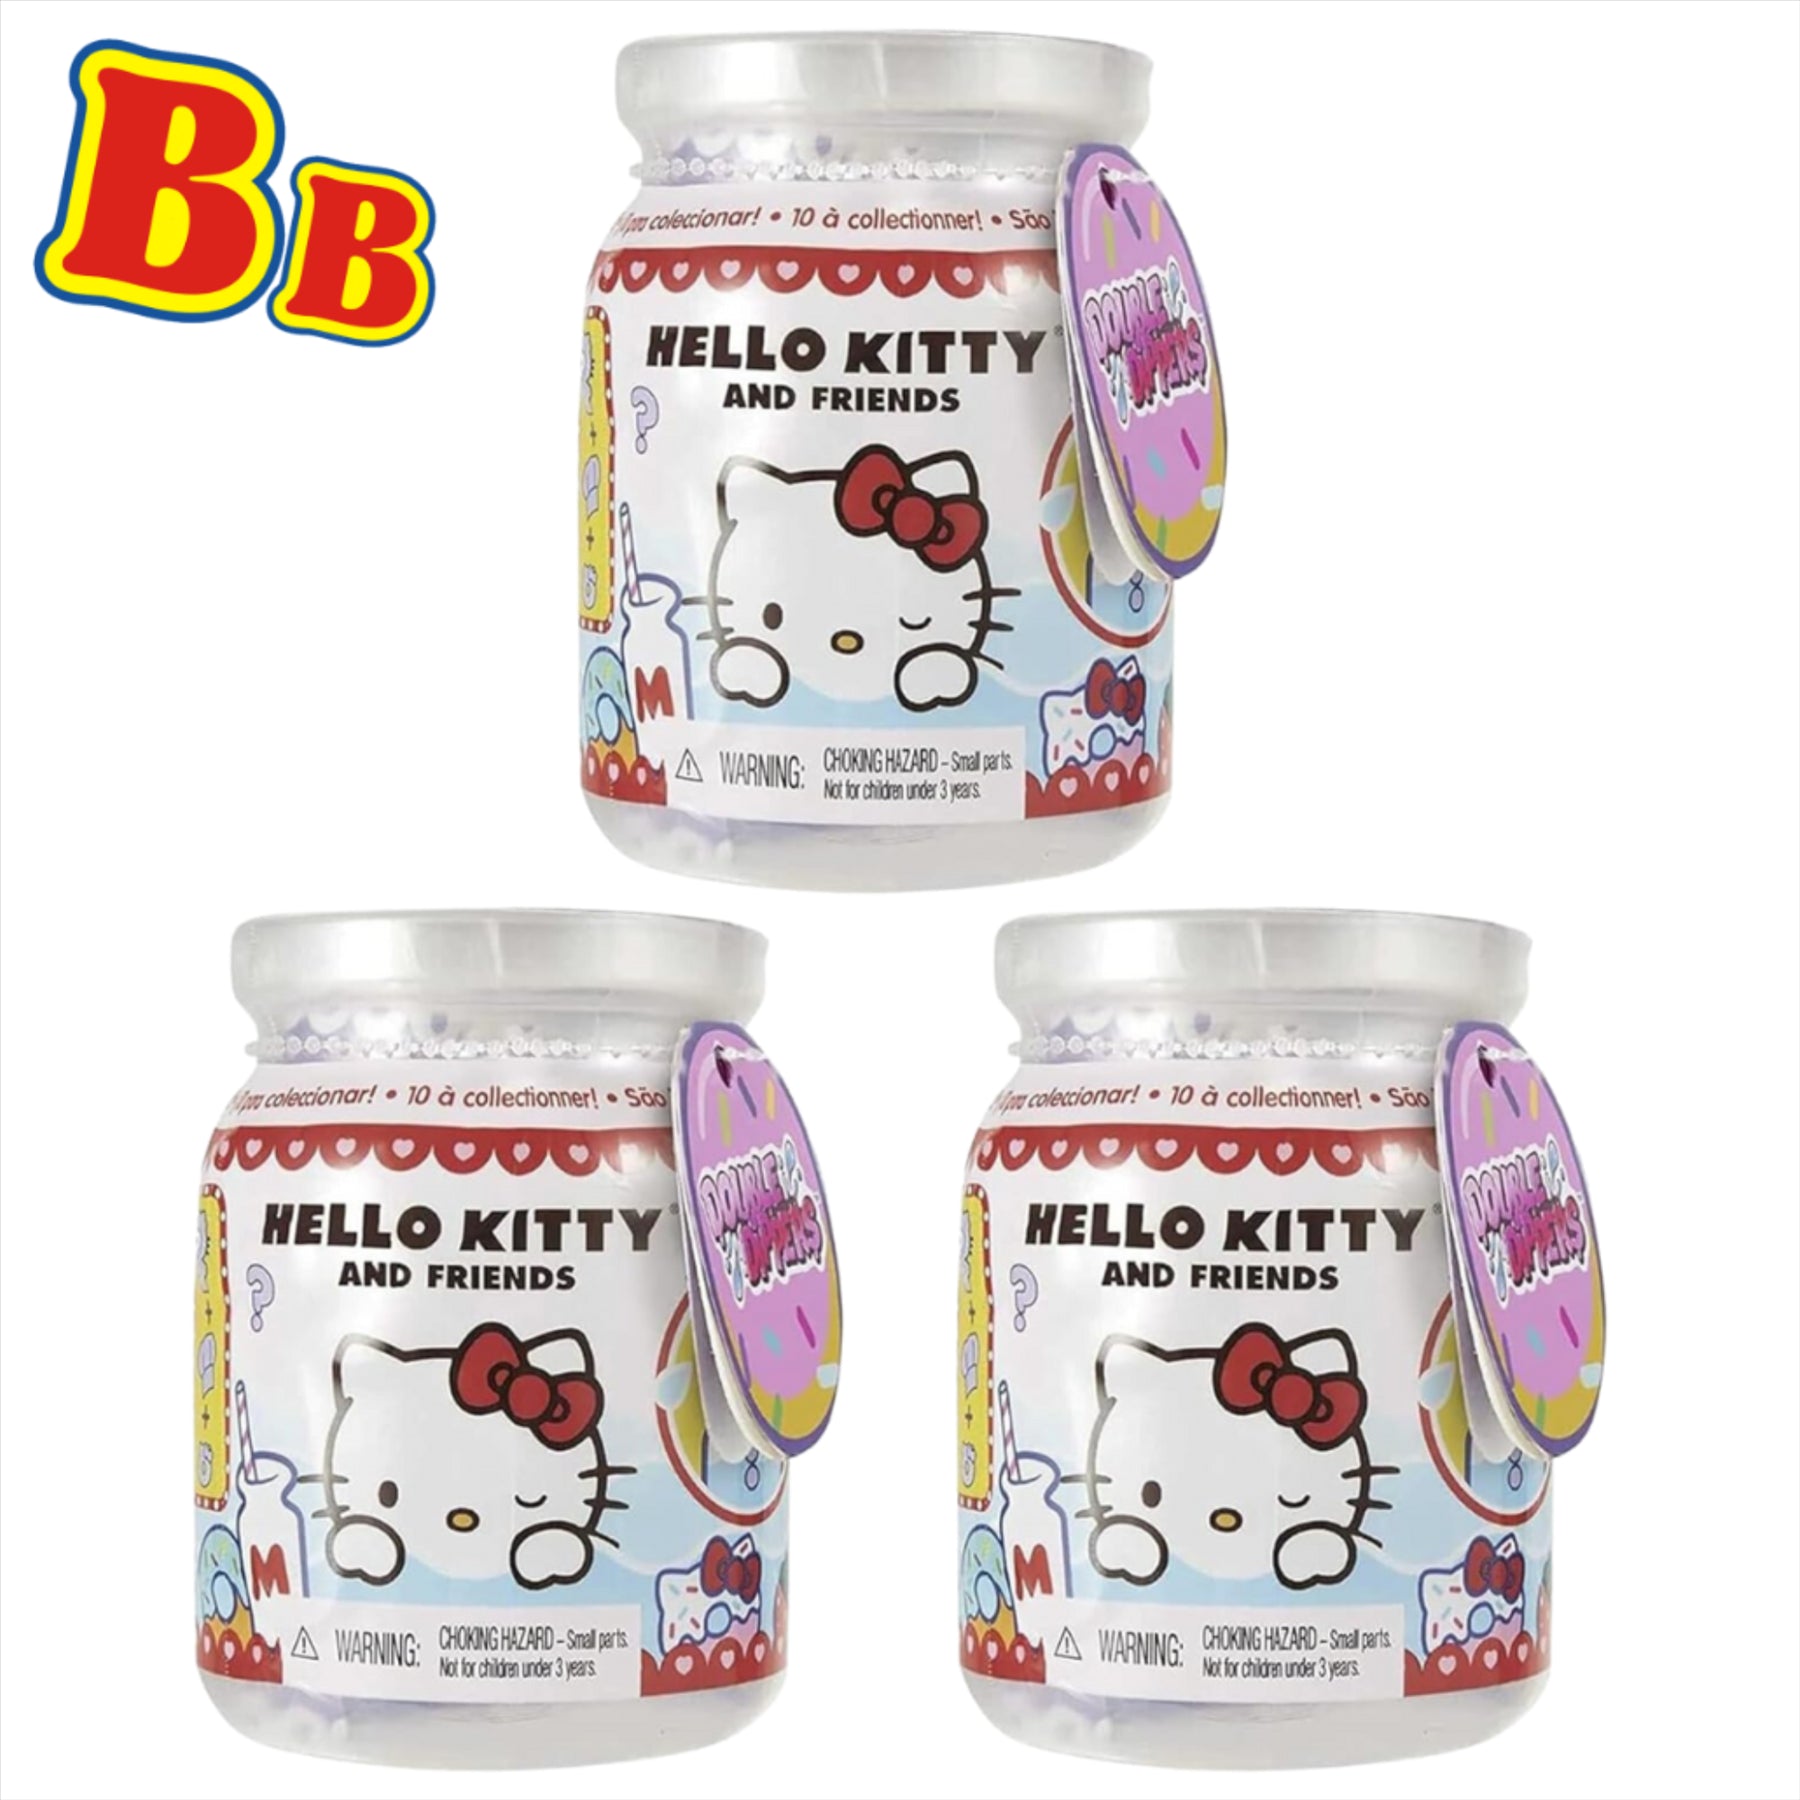 Hello Kitty Double Dippers Collectible Figures Surprise Blind Pack of 3 - Toptoys2u